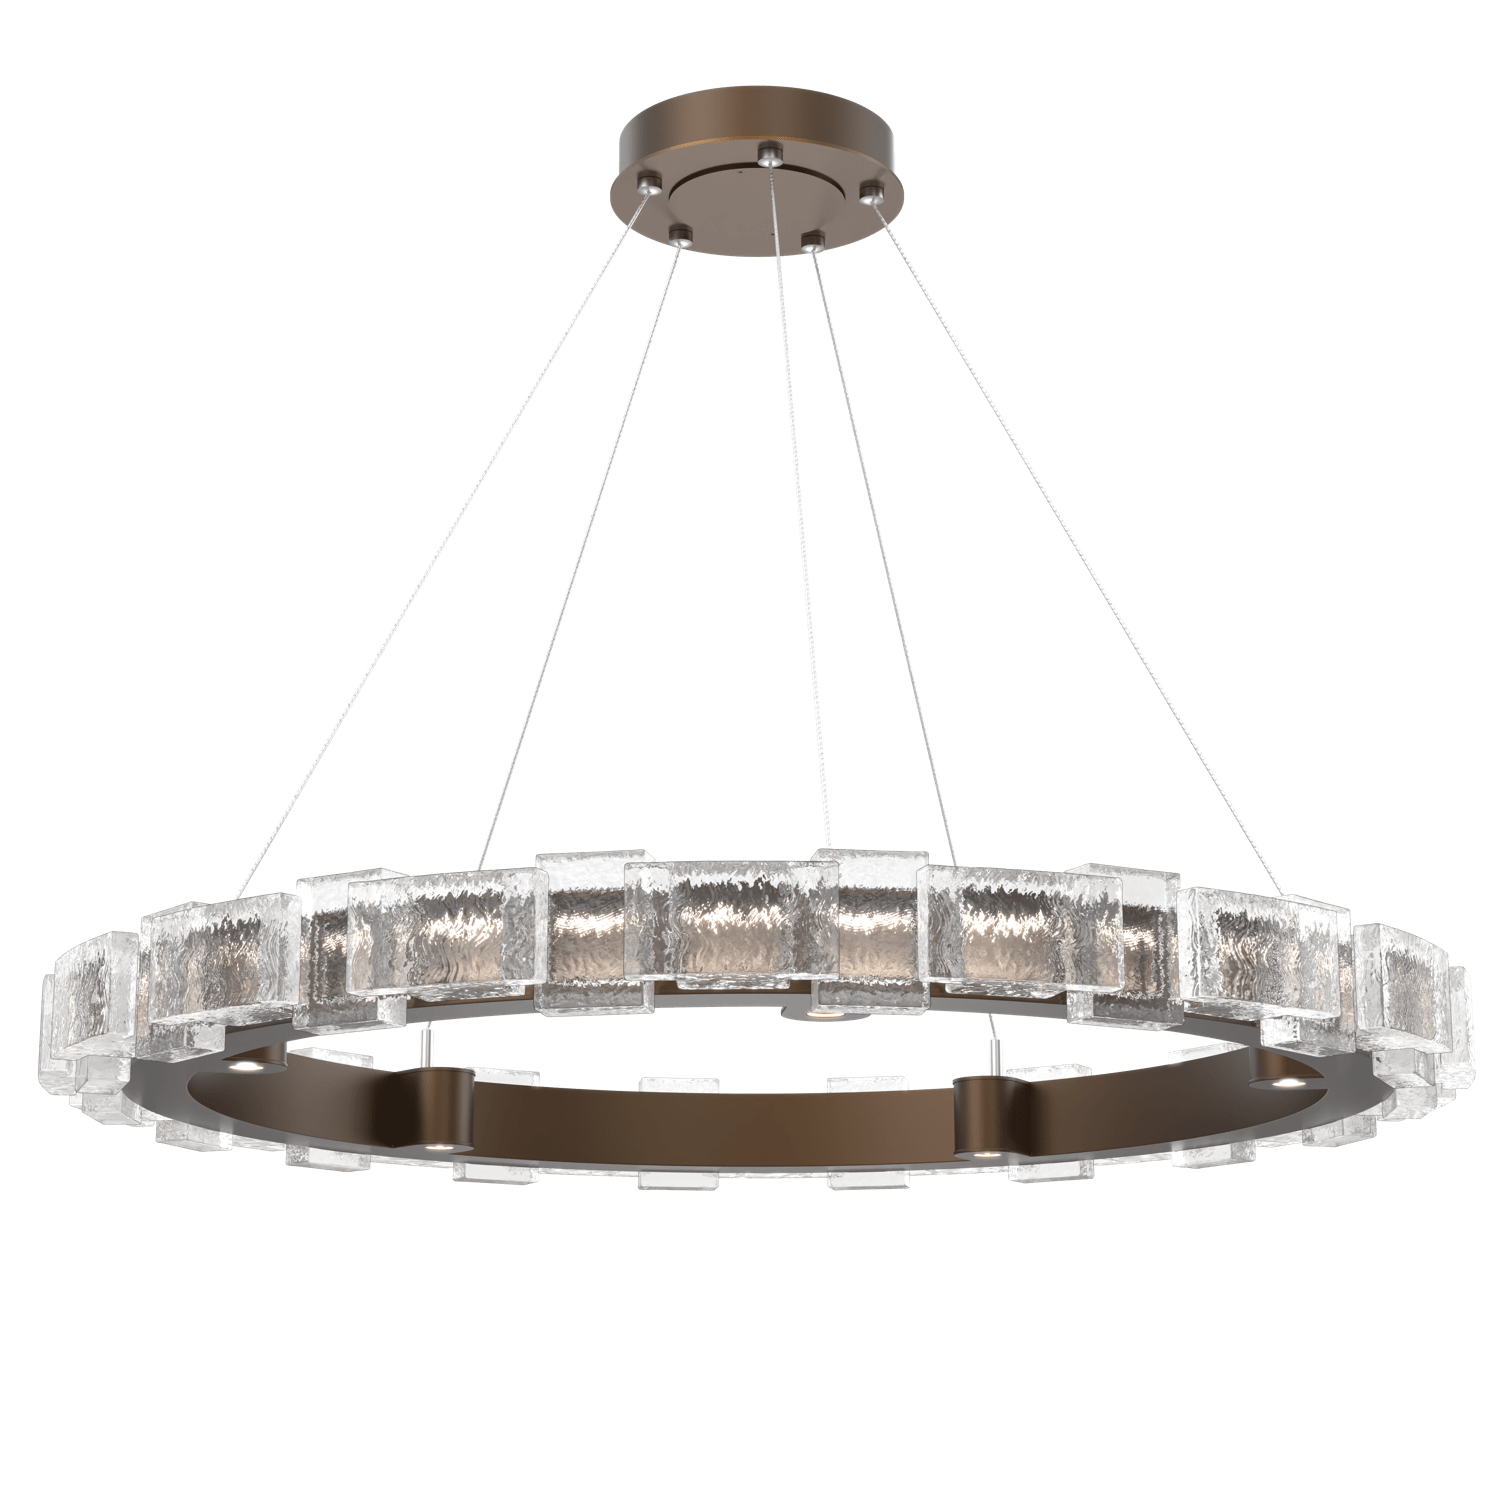 CHB0087-38-FB-TE-Hammerton-Studio-Tessera-38-inch-ring-chandelier-with-flat-bronze-finish-and-clear-tetro-cast-glass-shade-and-LED-lamping